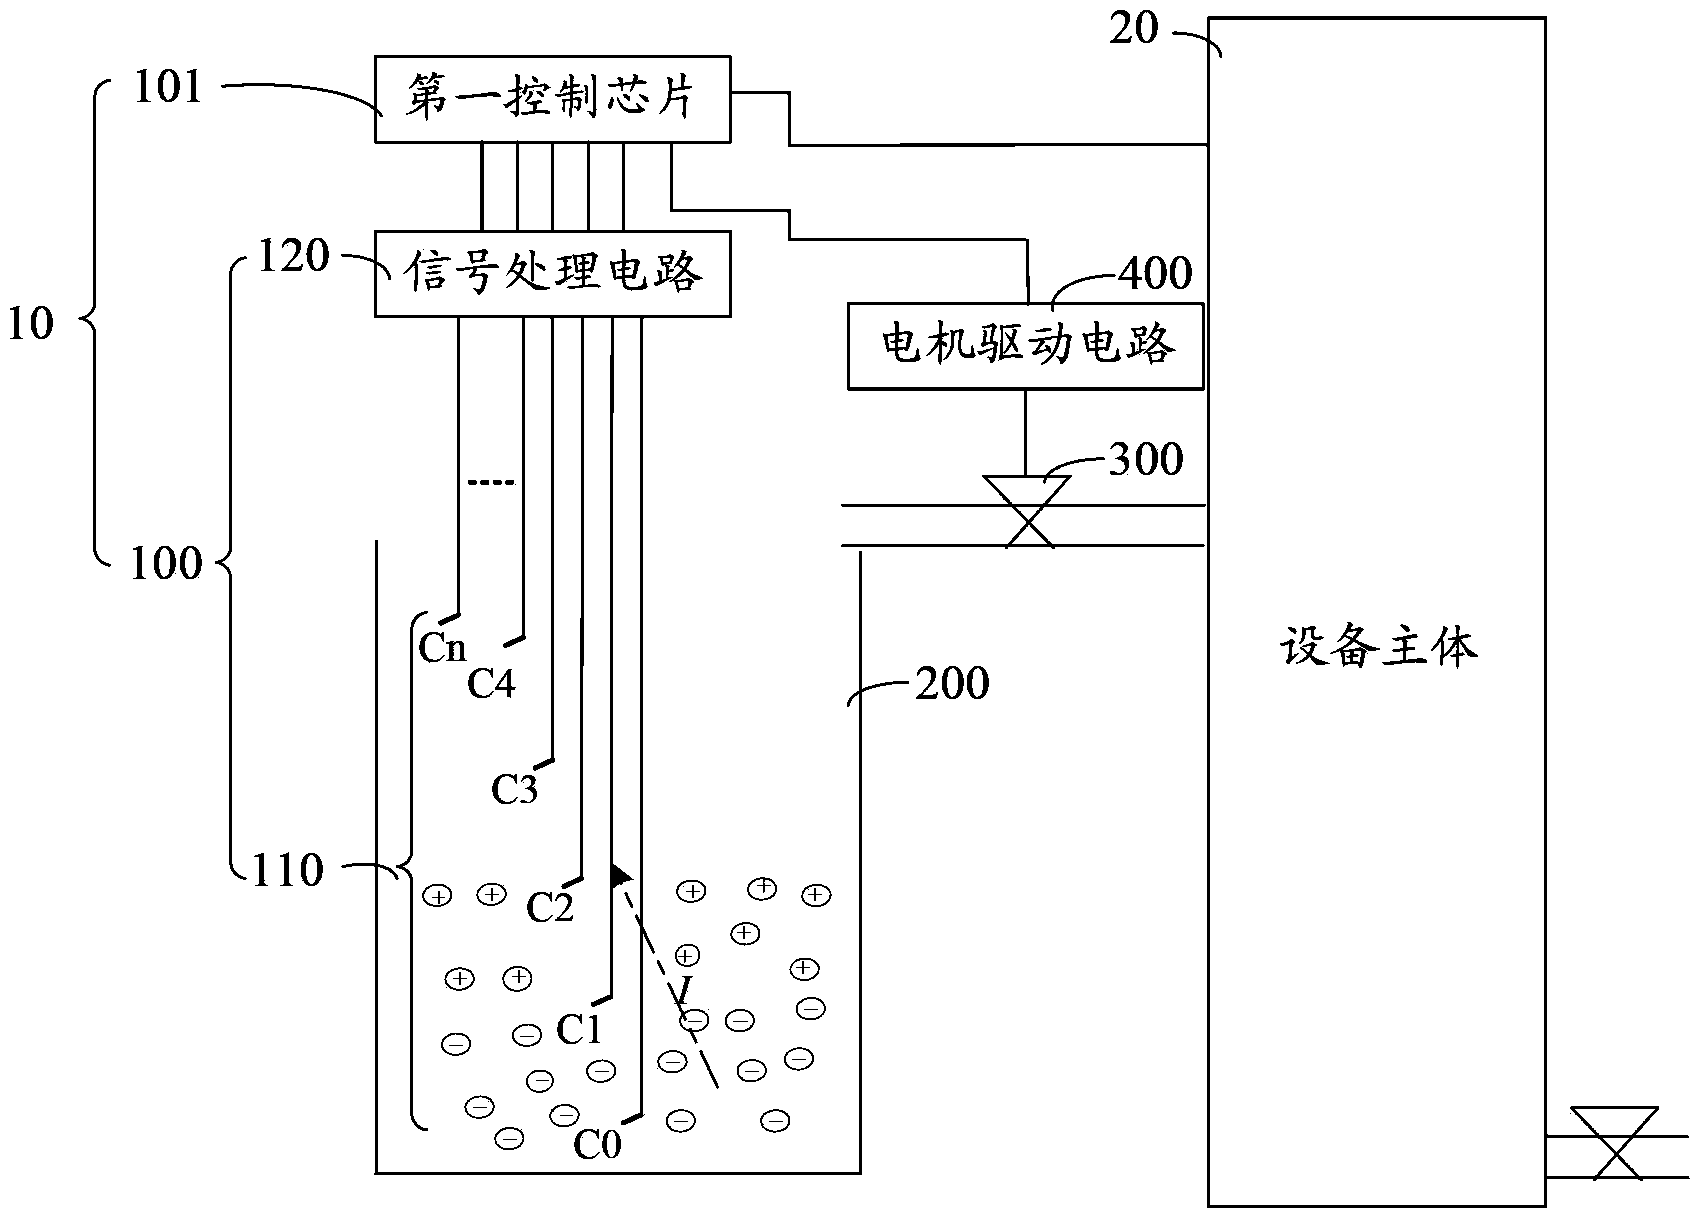 Liquid level detecting circuit, controller and water heater